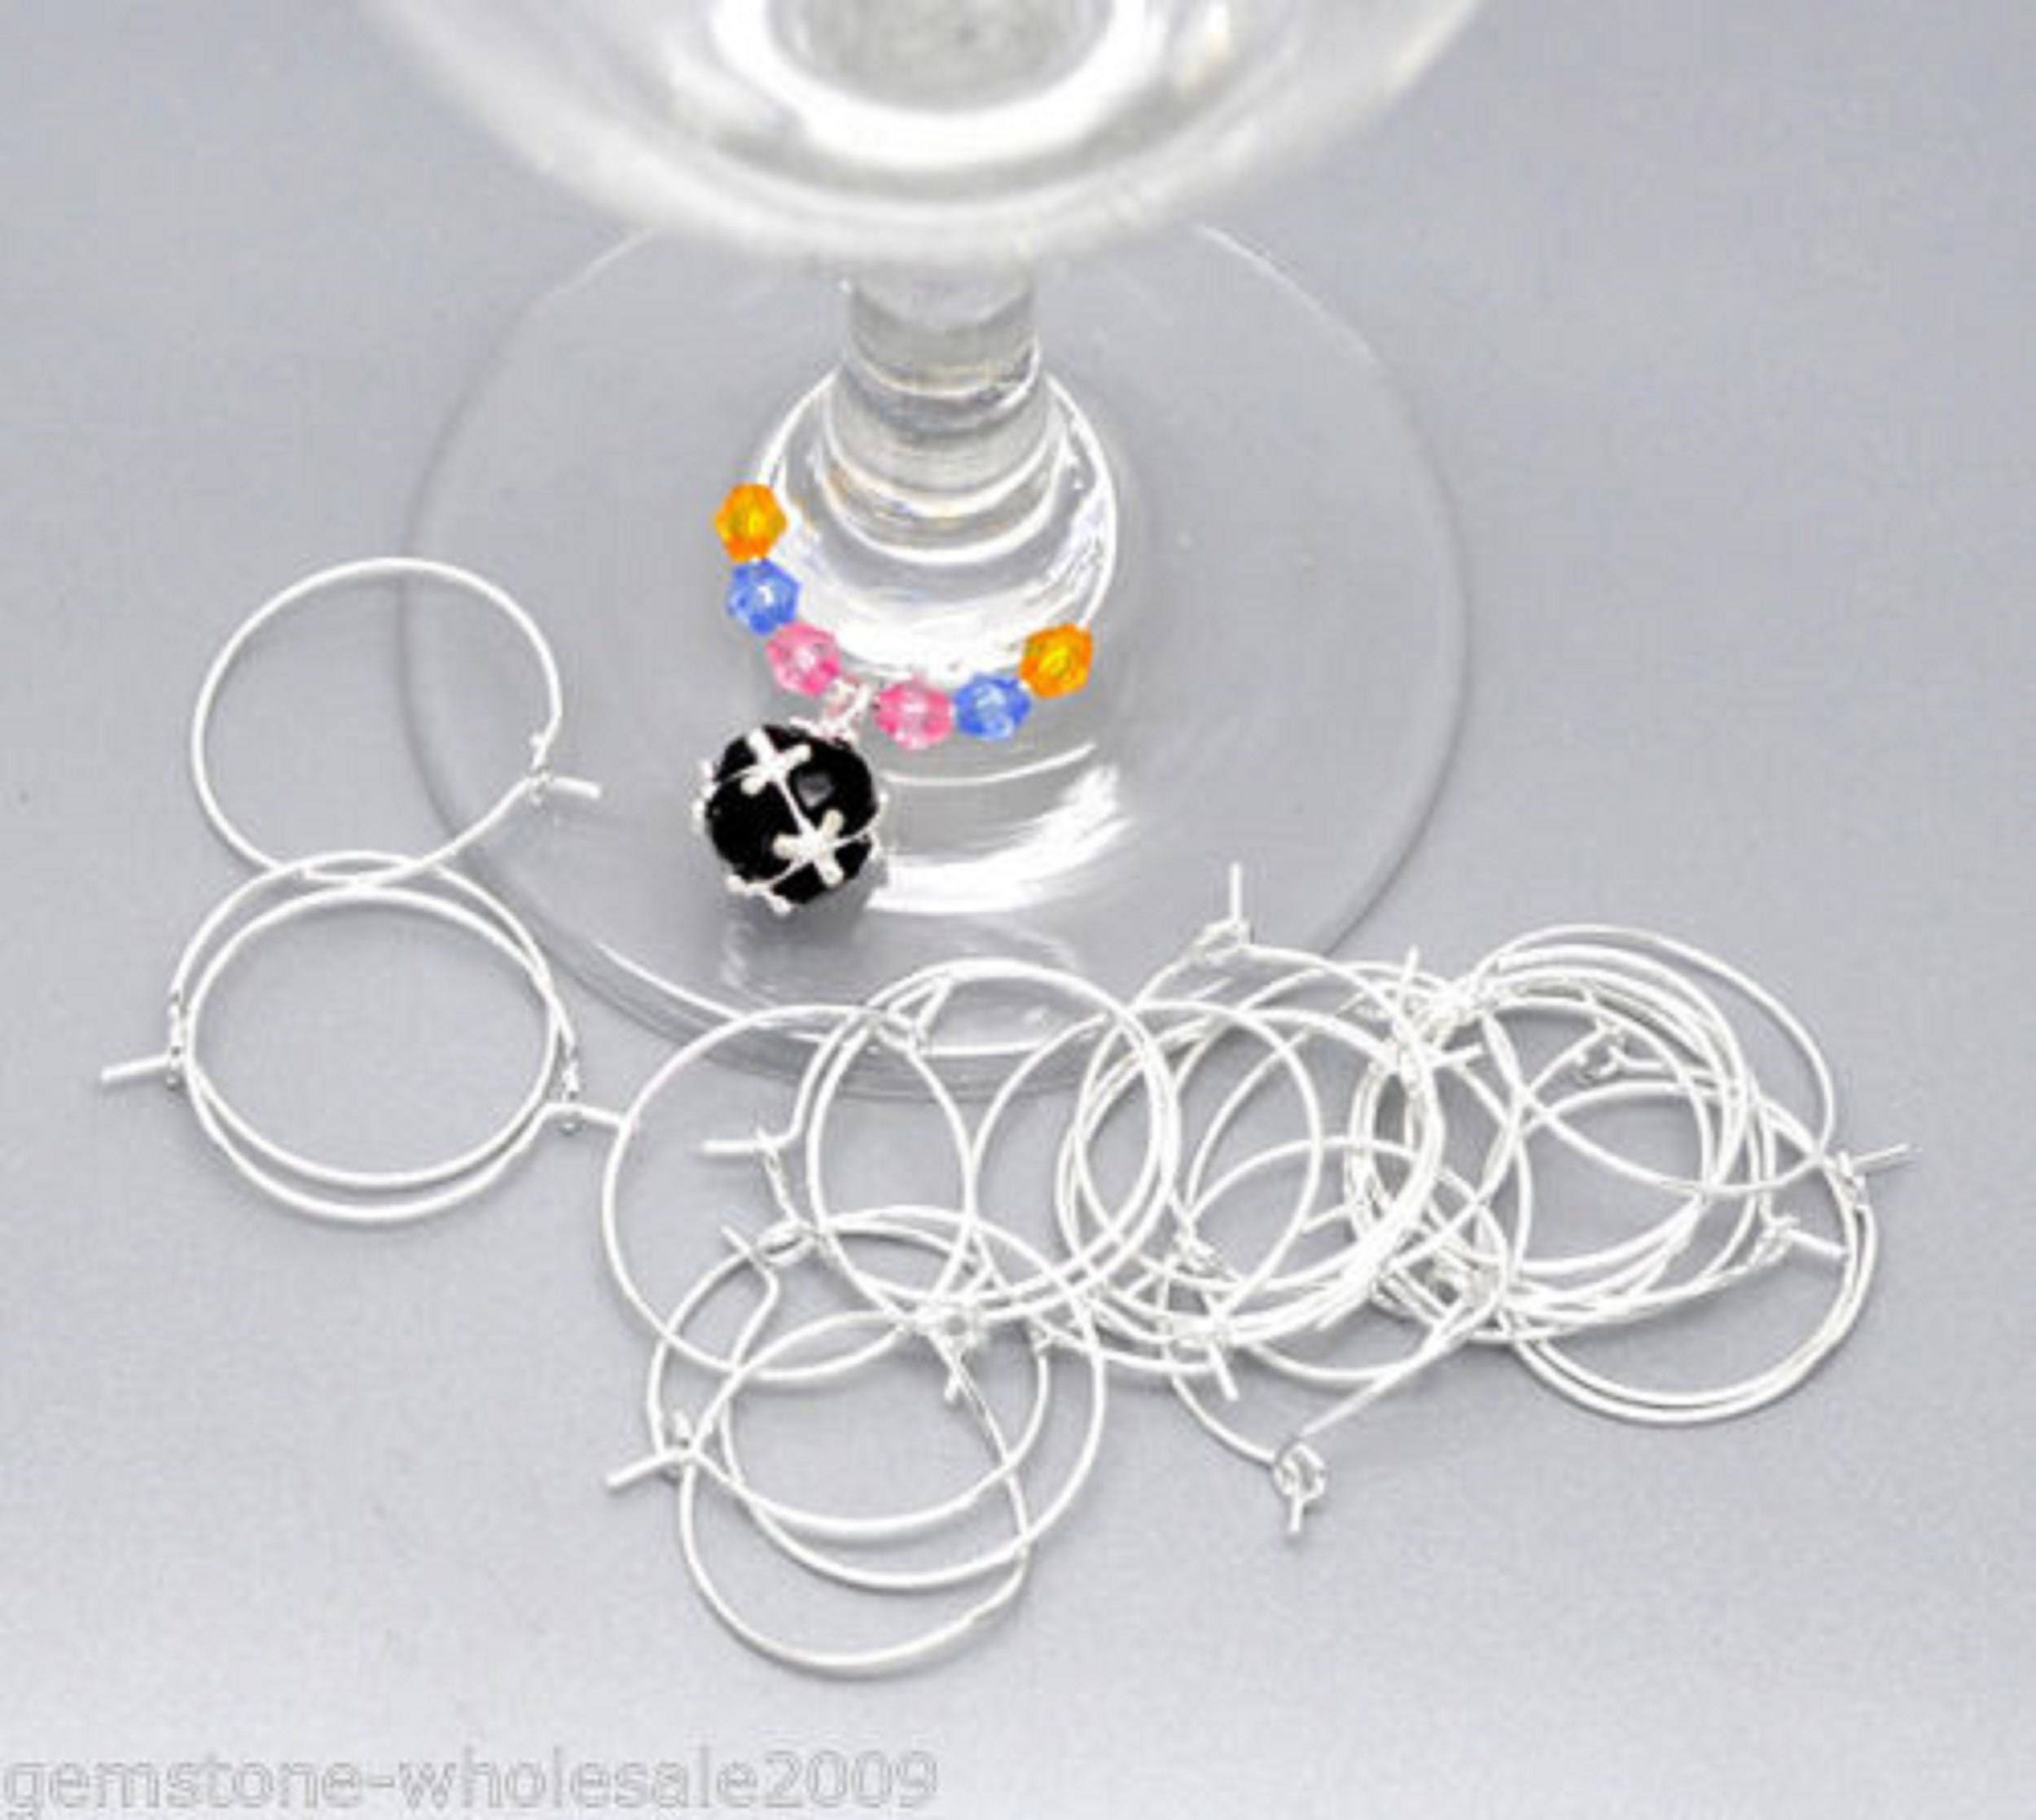 25 OR 50 Silver Tone Wine Glass Charm Rings DIY Craft Make Sweet Gift 4  Holiday 25mm Add Colorful Beads Charms Bottle Caps Bottlecap 